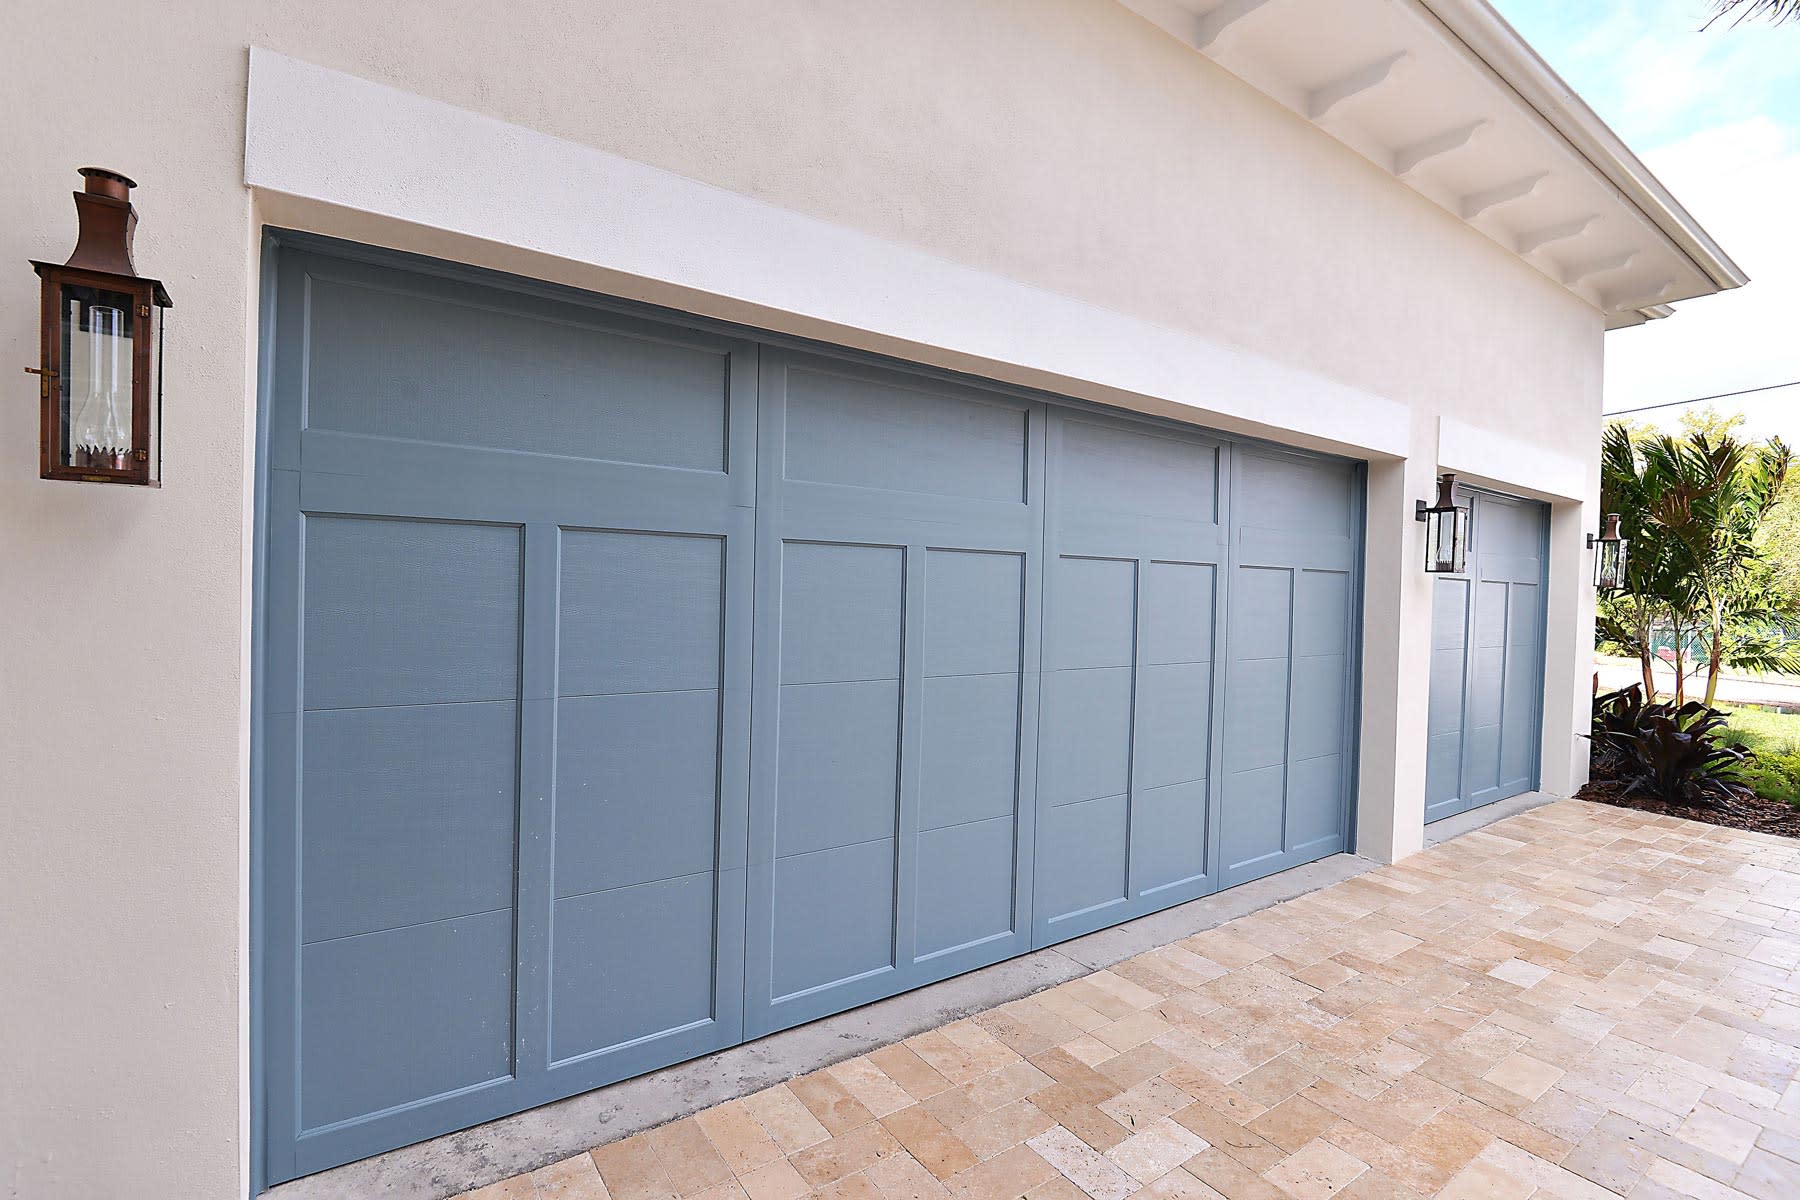 How much does it cost to paint a garage door?